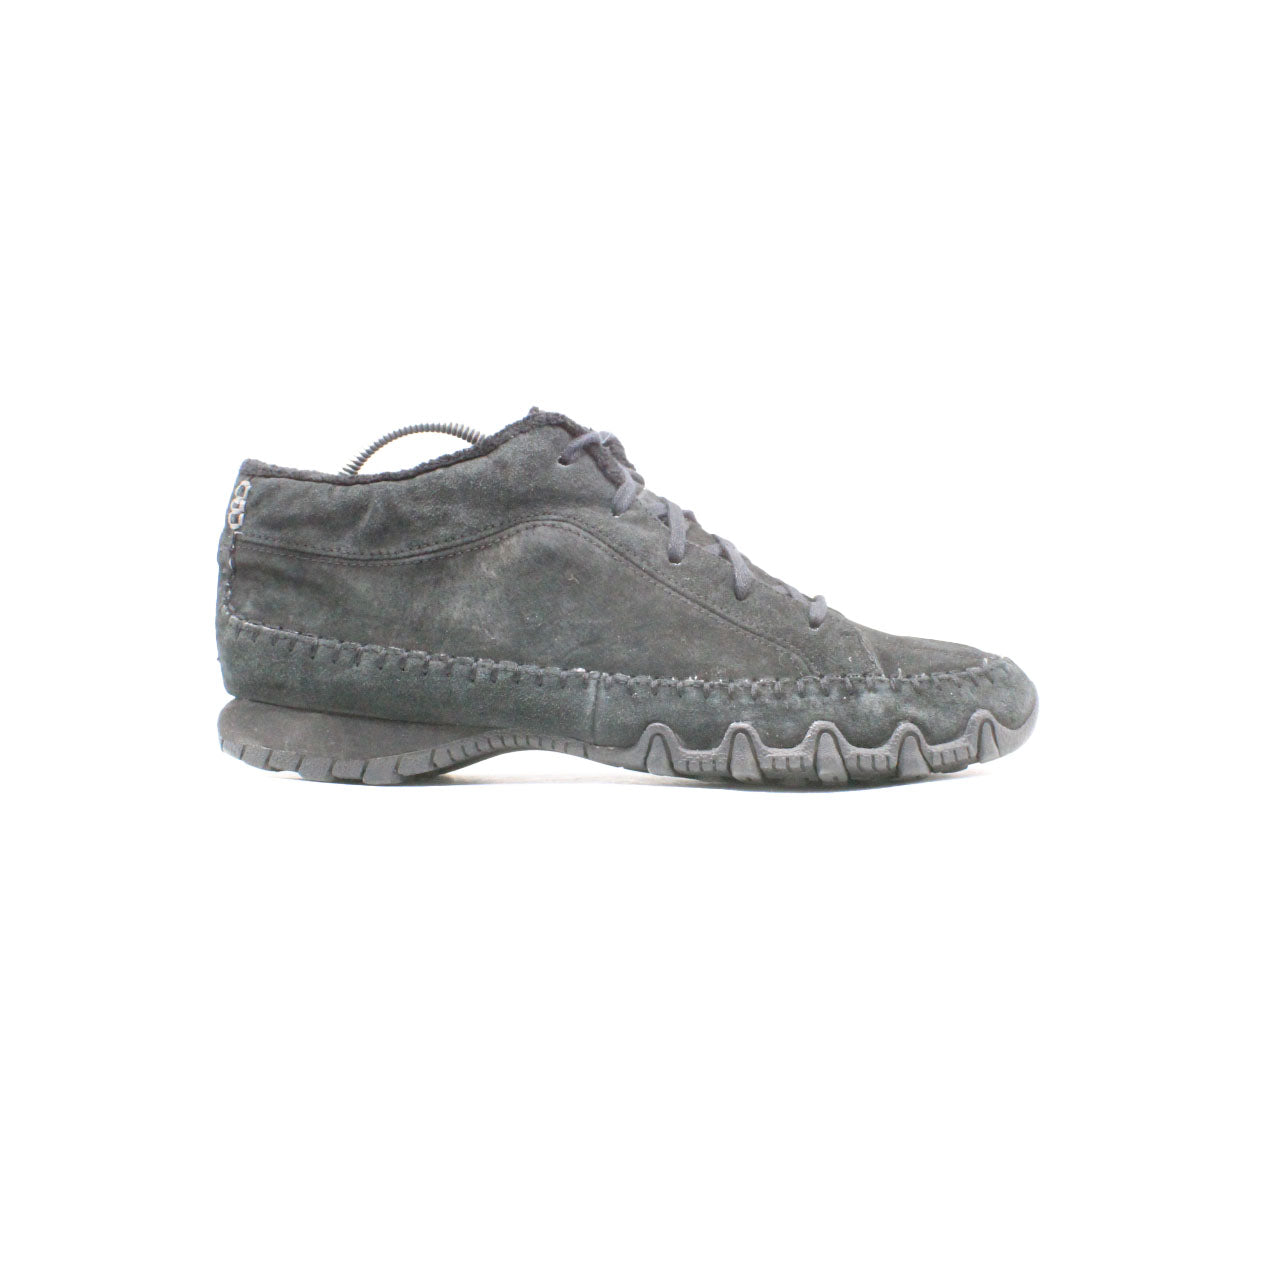 Skechers Relaxed Fit Chocolate Bikers Totem